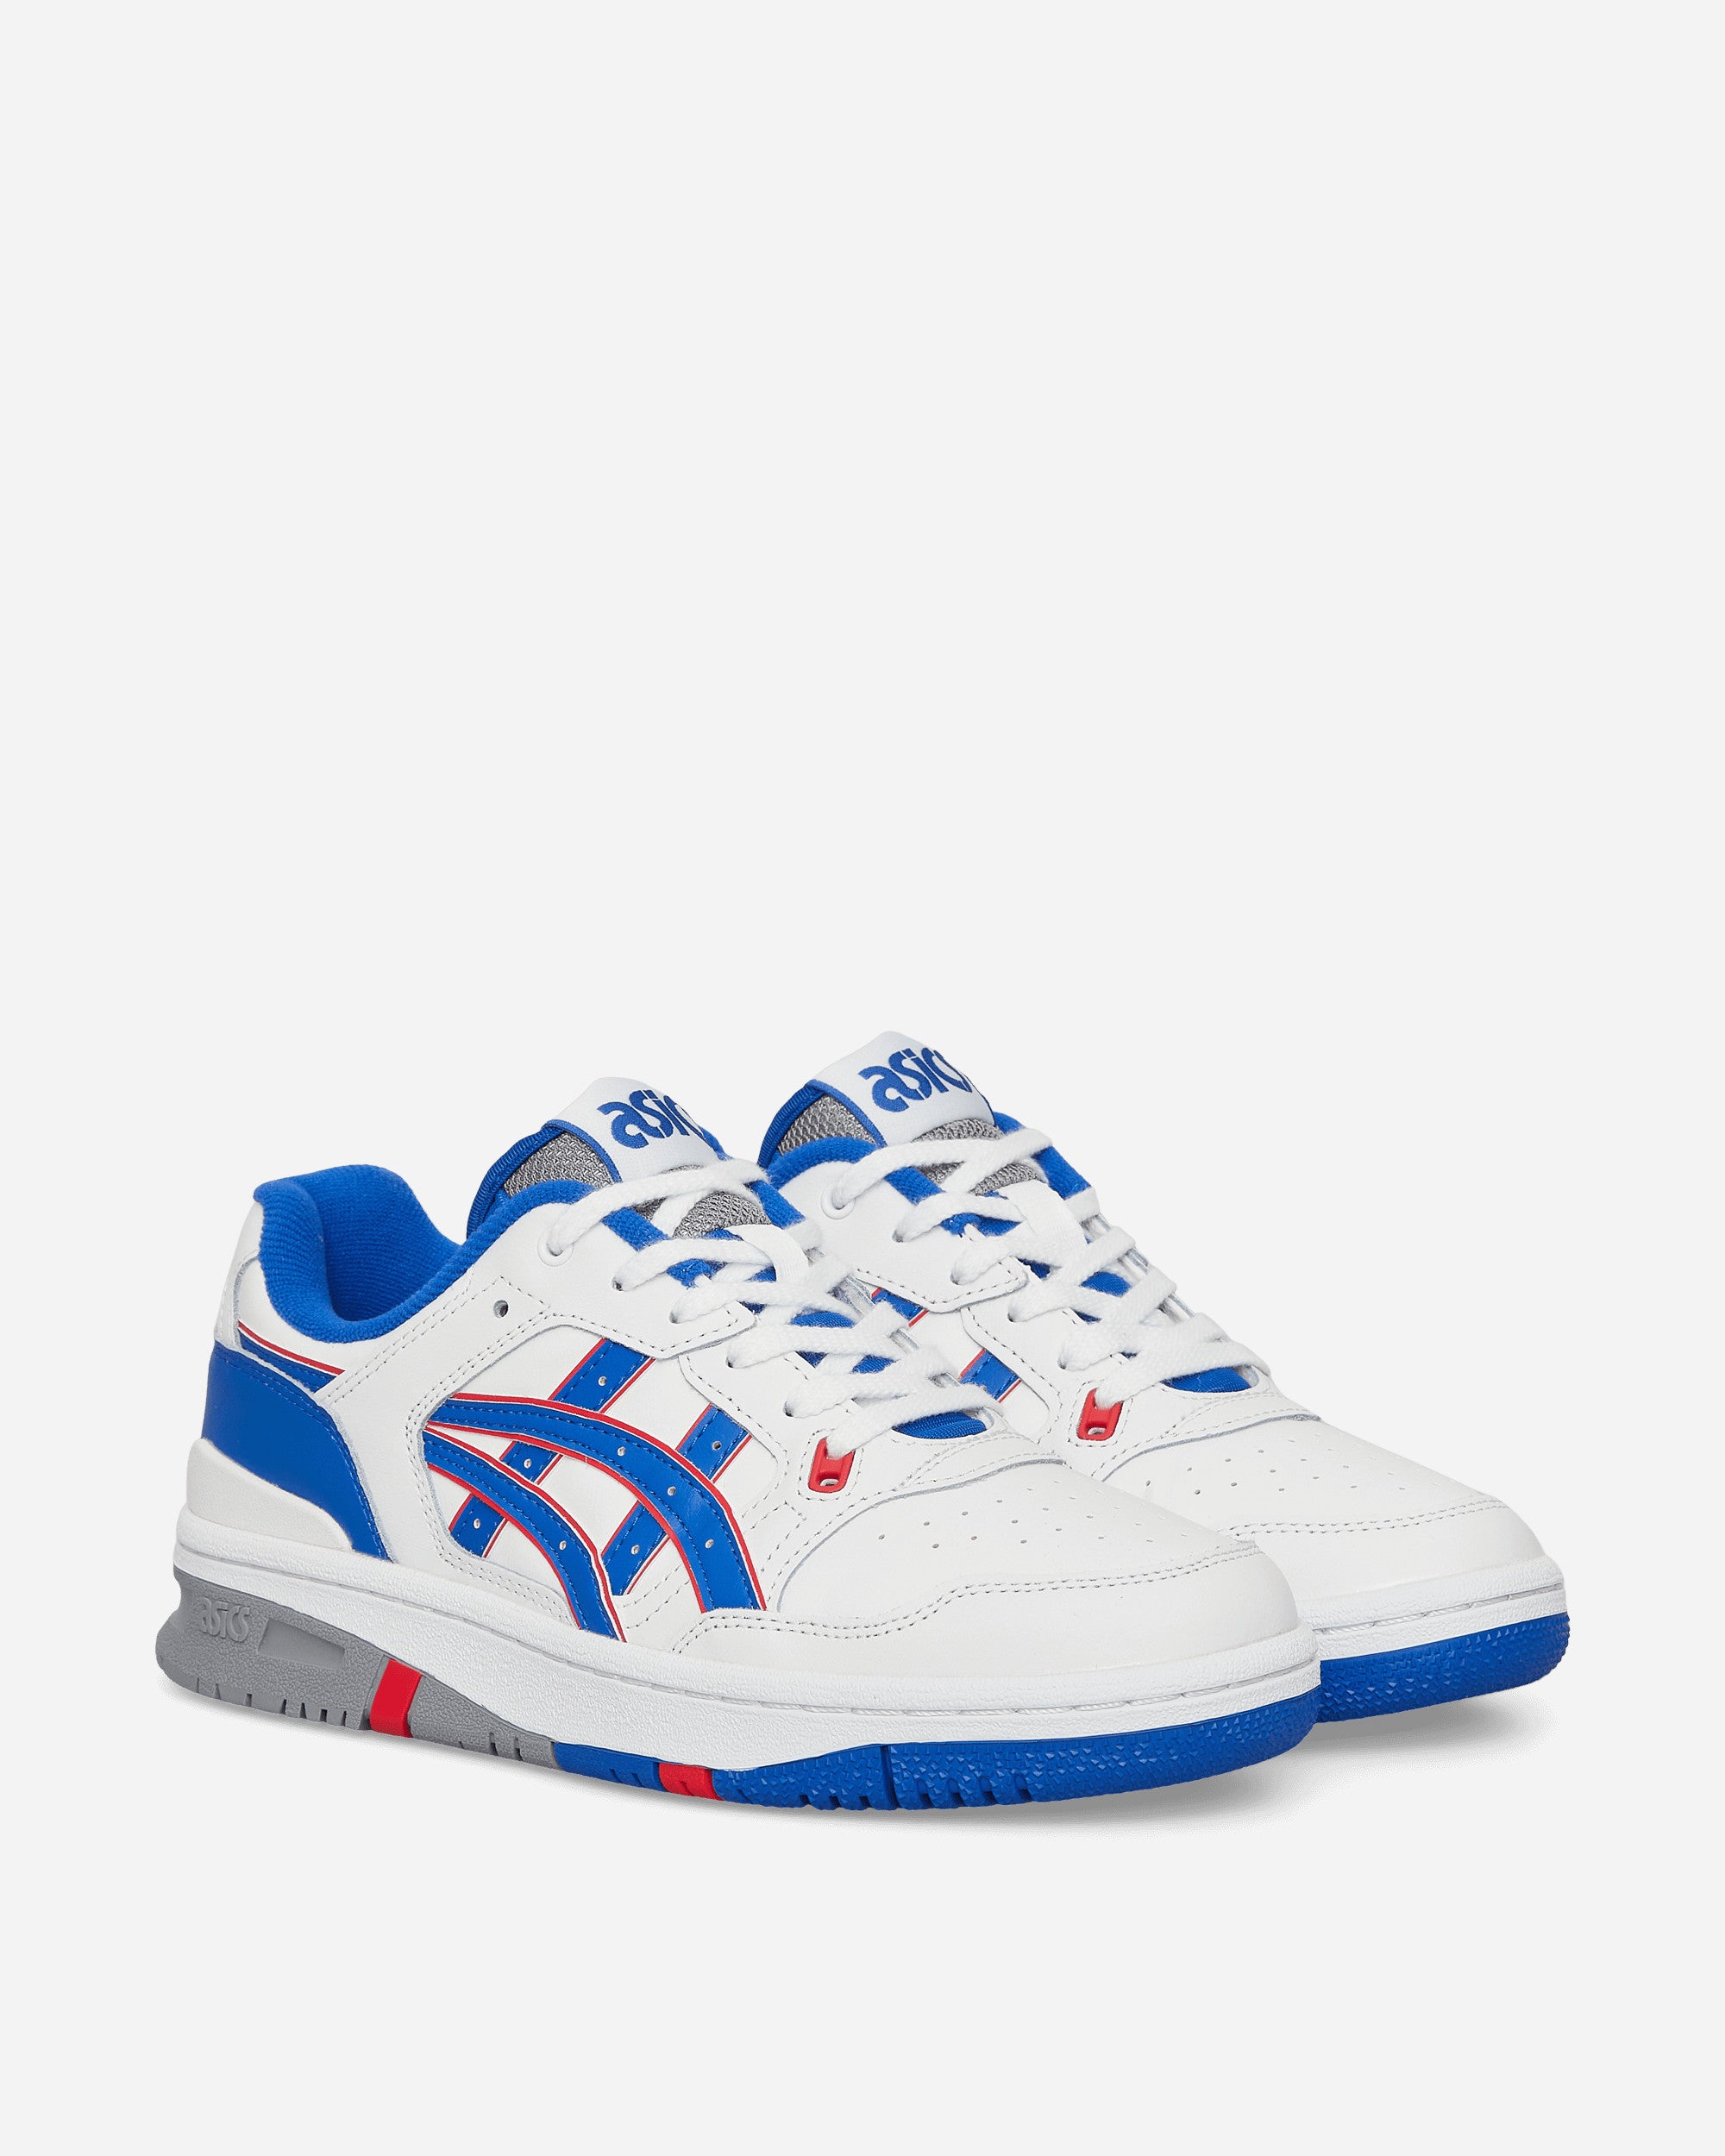 Asics Ex89 White/Illusion Blue Sneakers Low 1201A476-101